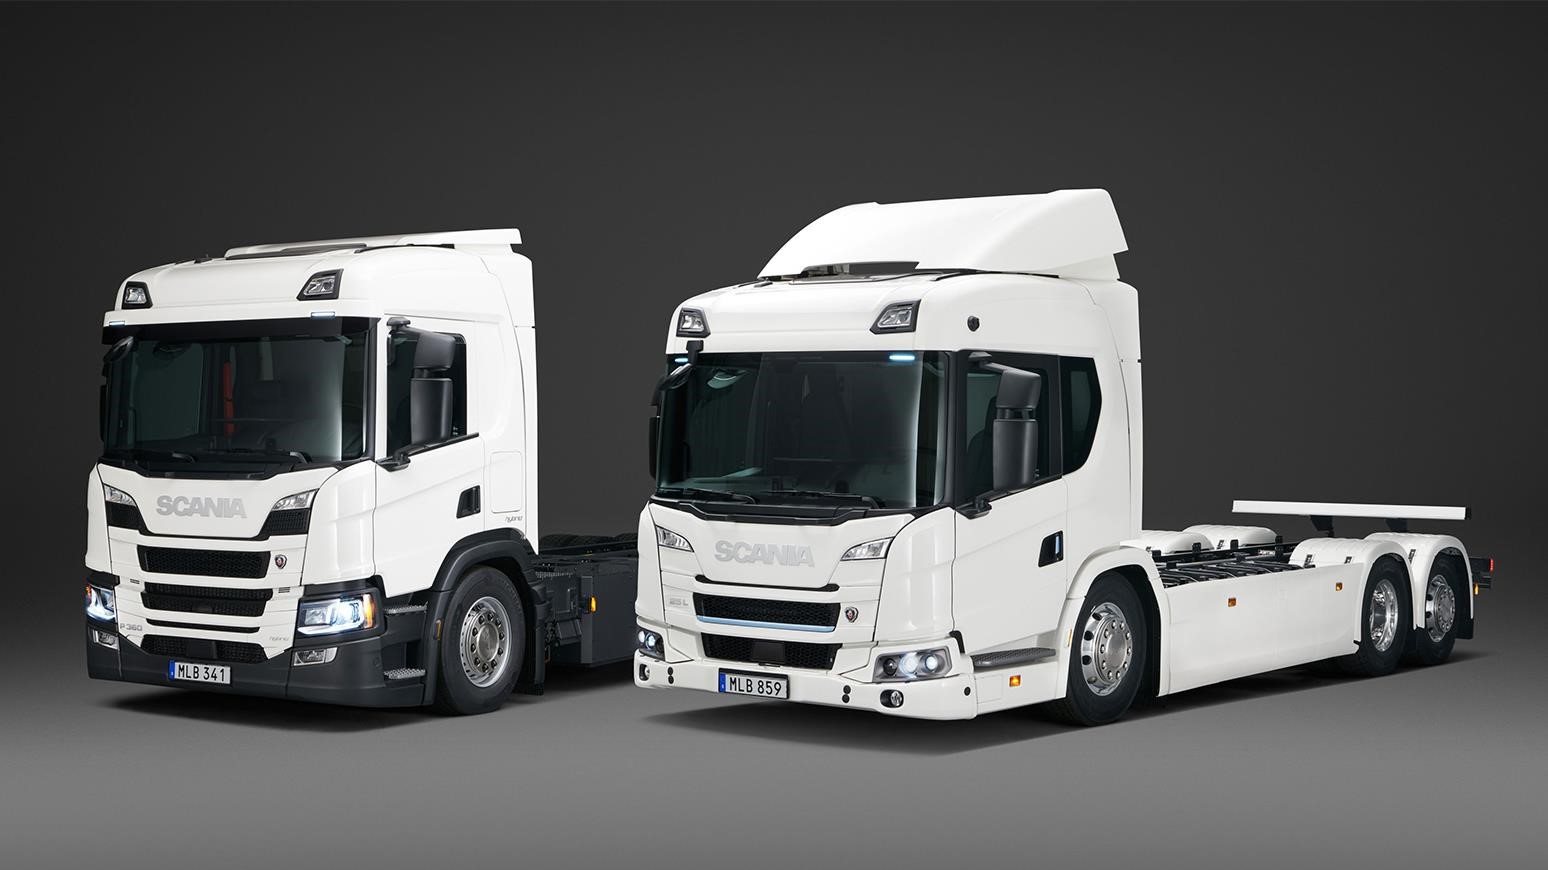 Scania Launches Electric Truck Range Including All-Electric & Plug-In Hybrid Vehicles